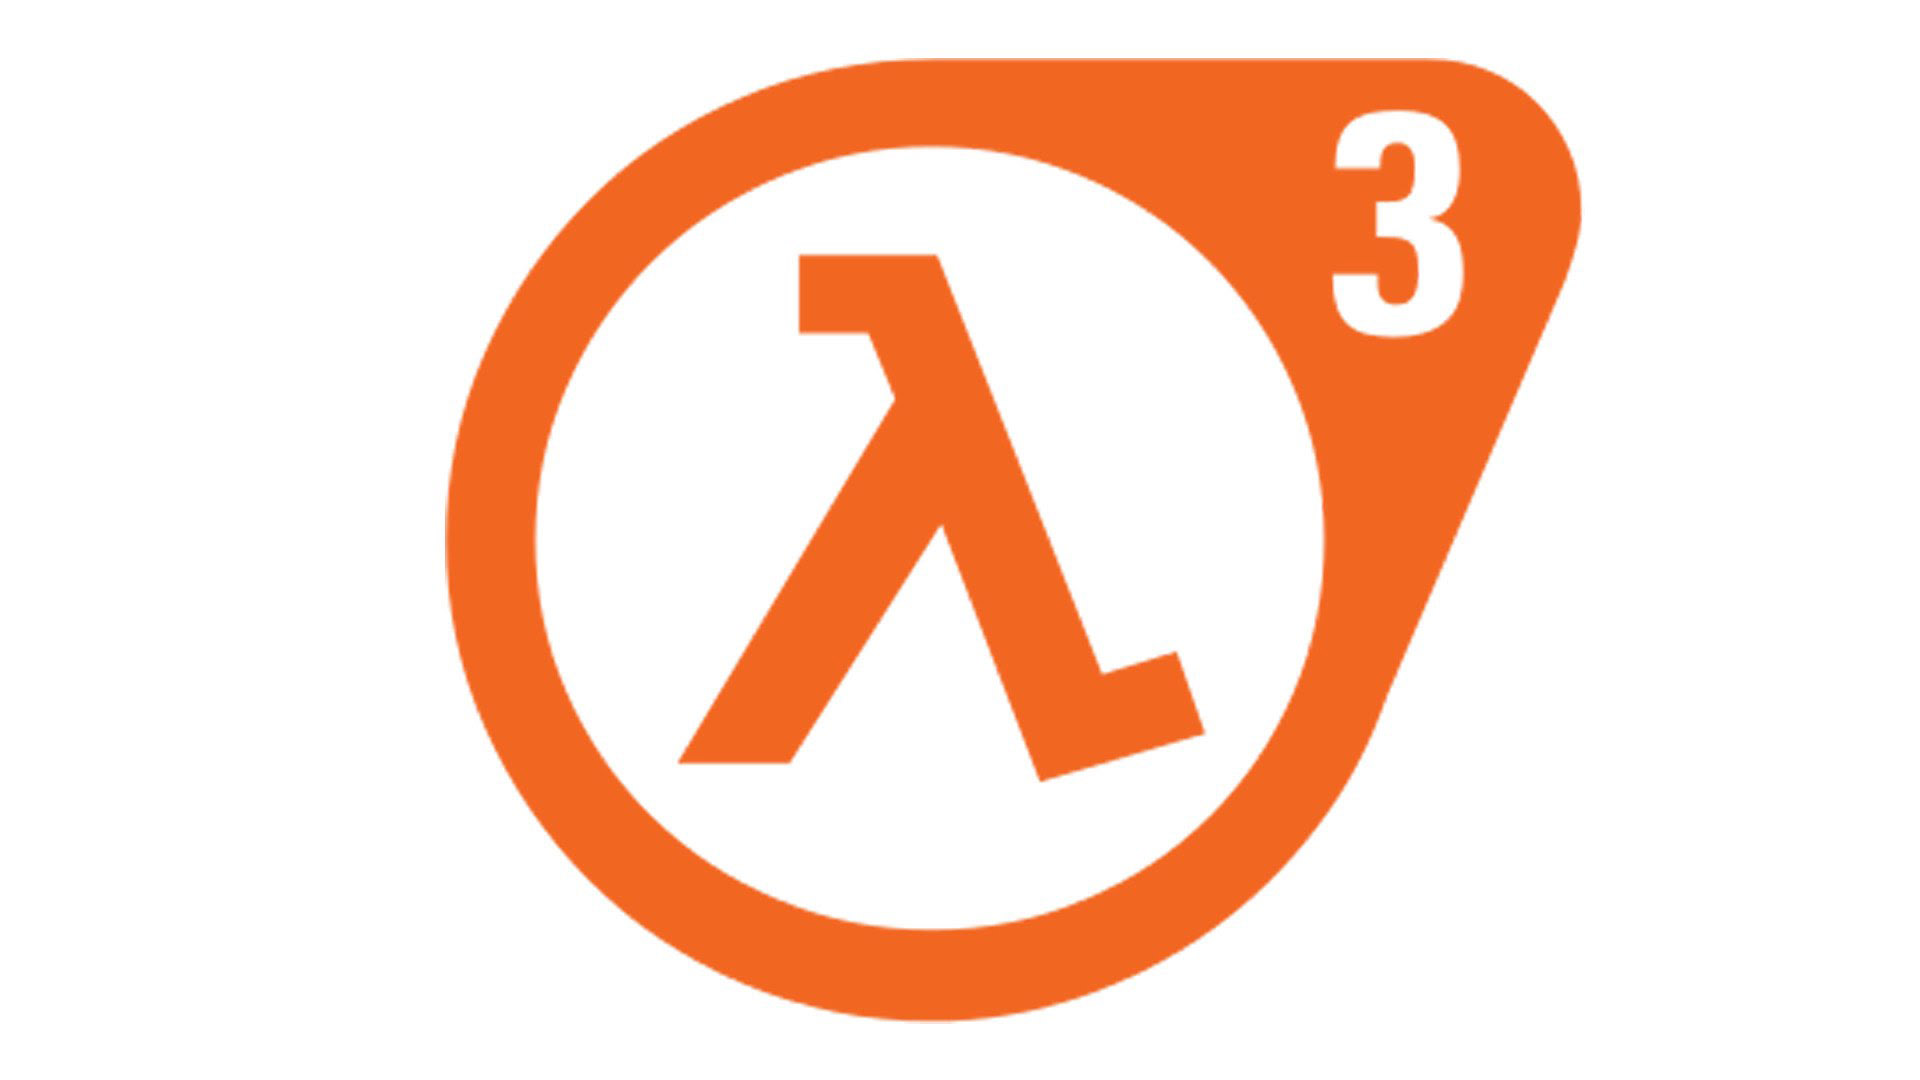 Half-Life 3 Was Scrapped In 2015, Valve Insider Leaks Gameplay And Story